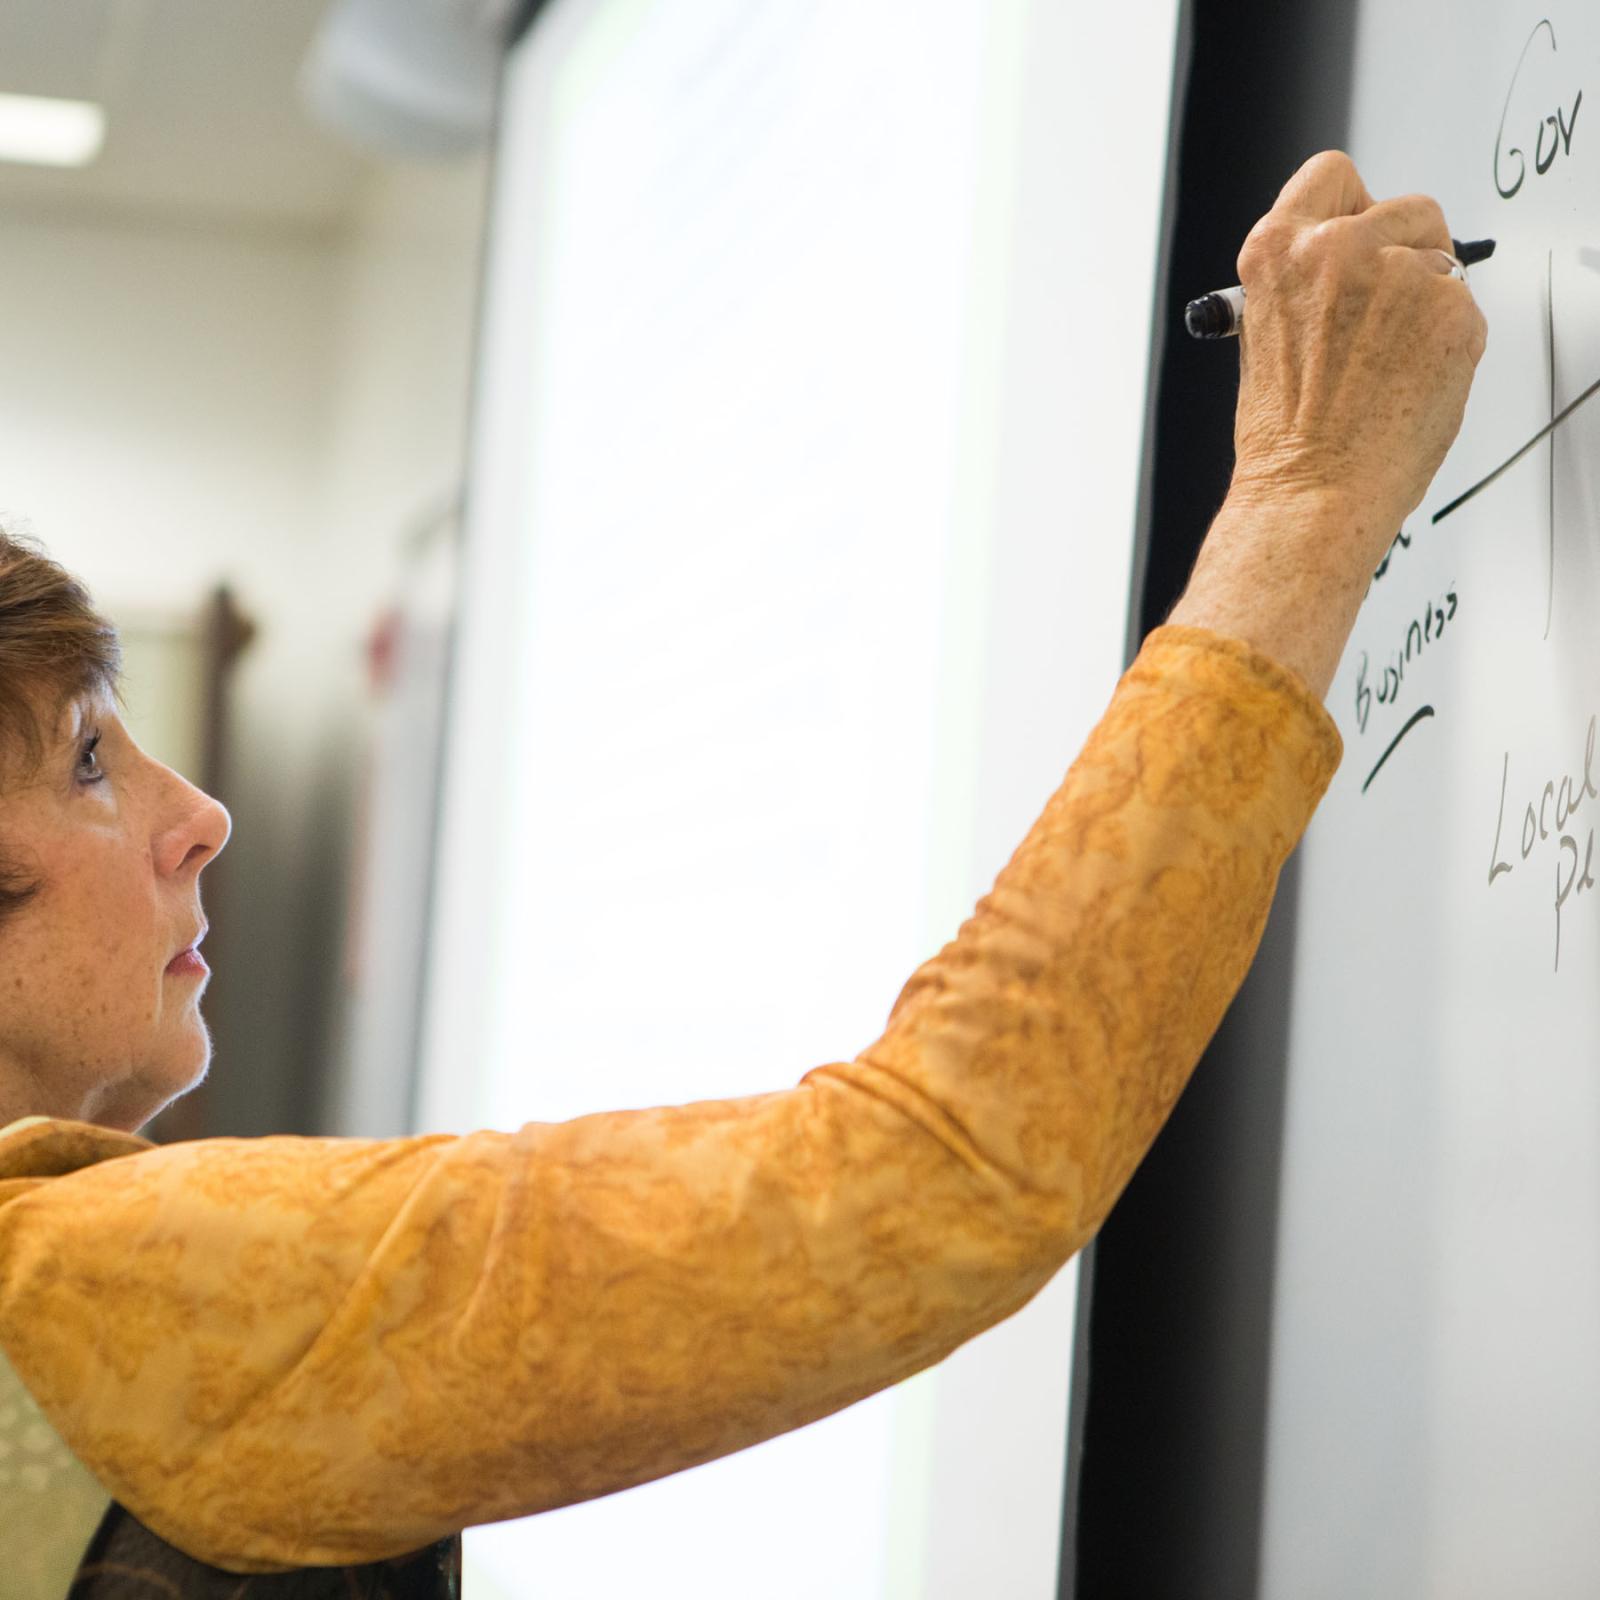 management professor Claudia Green writing on a whiteboard